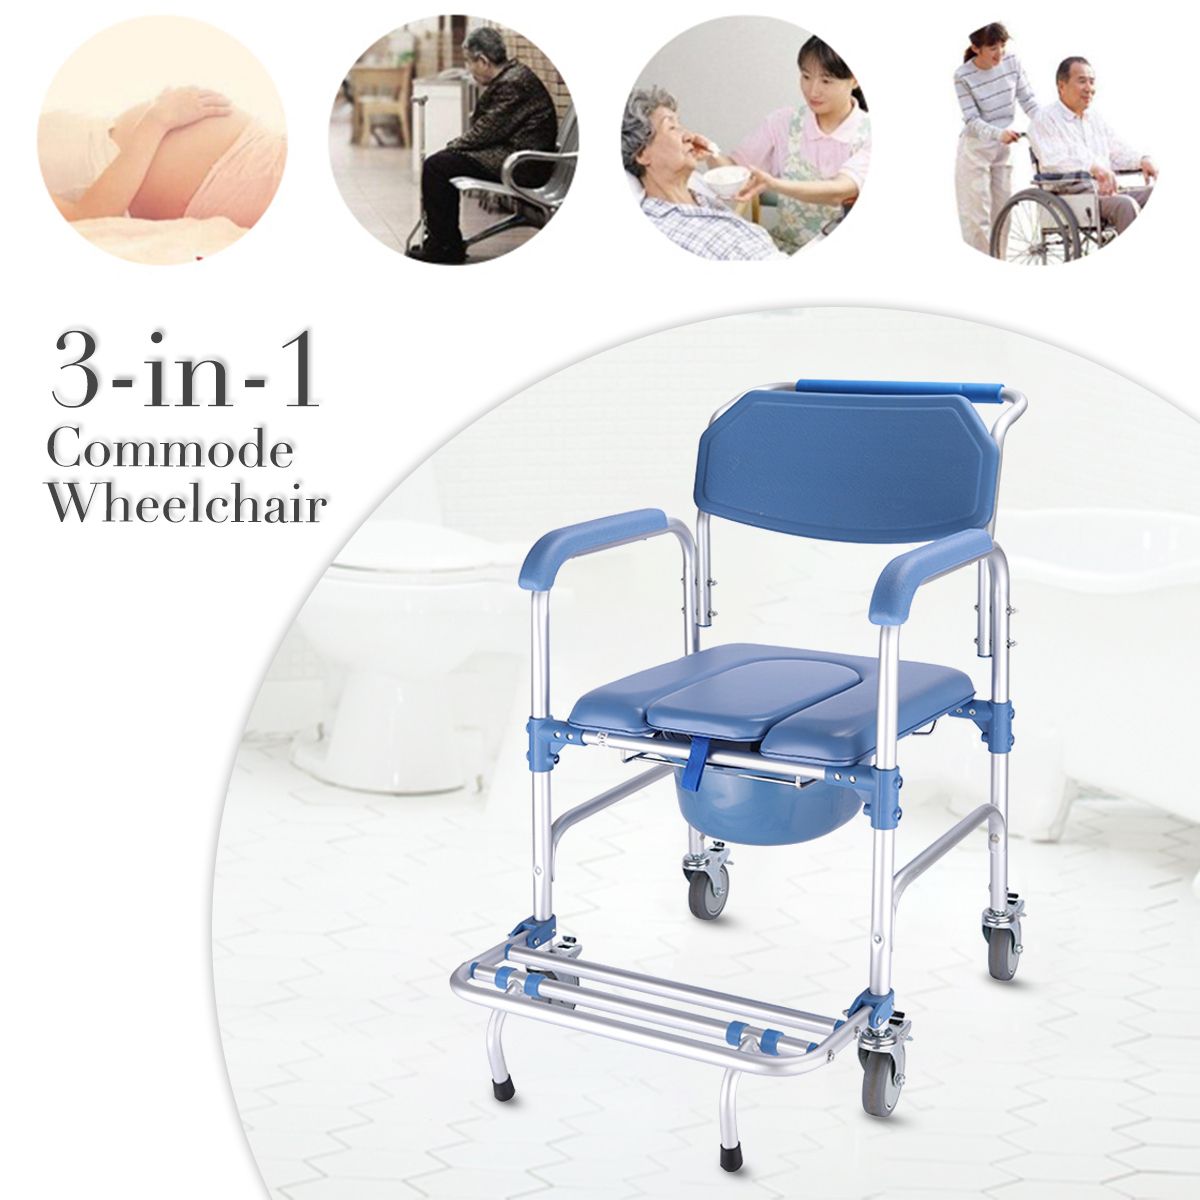 3-in1-Commode-Wheelchair-Toilet-Shower-Seat-Potty-Bathroom-Rolling-Chair-Soft-1670767